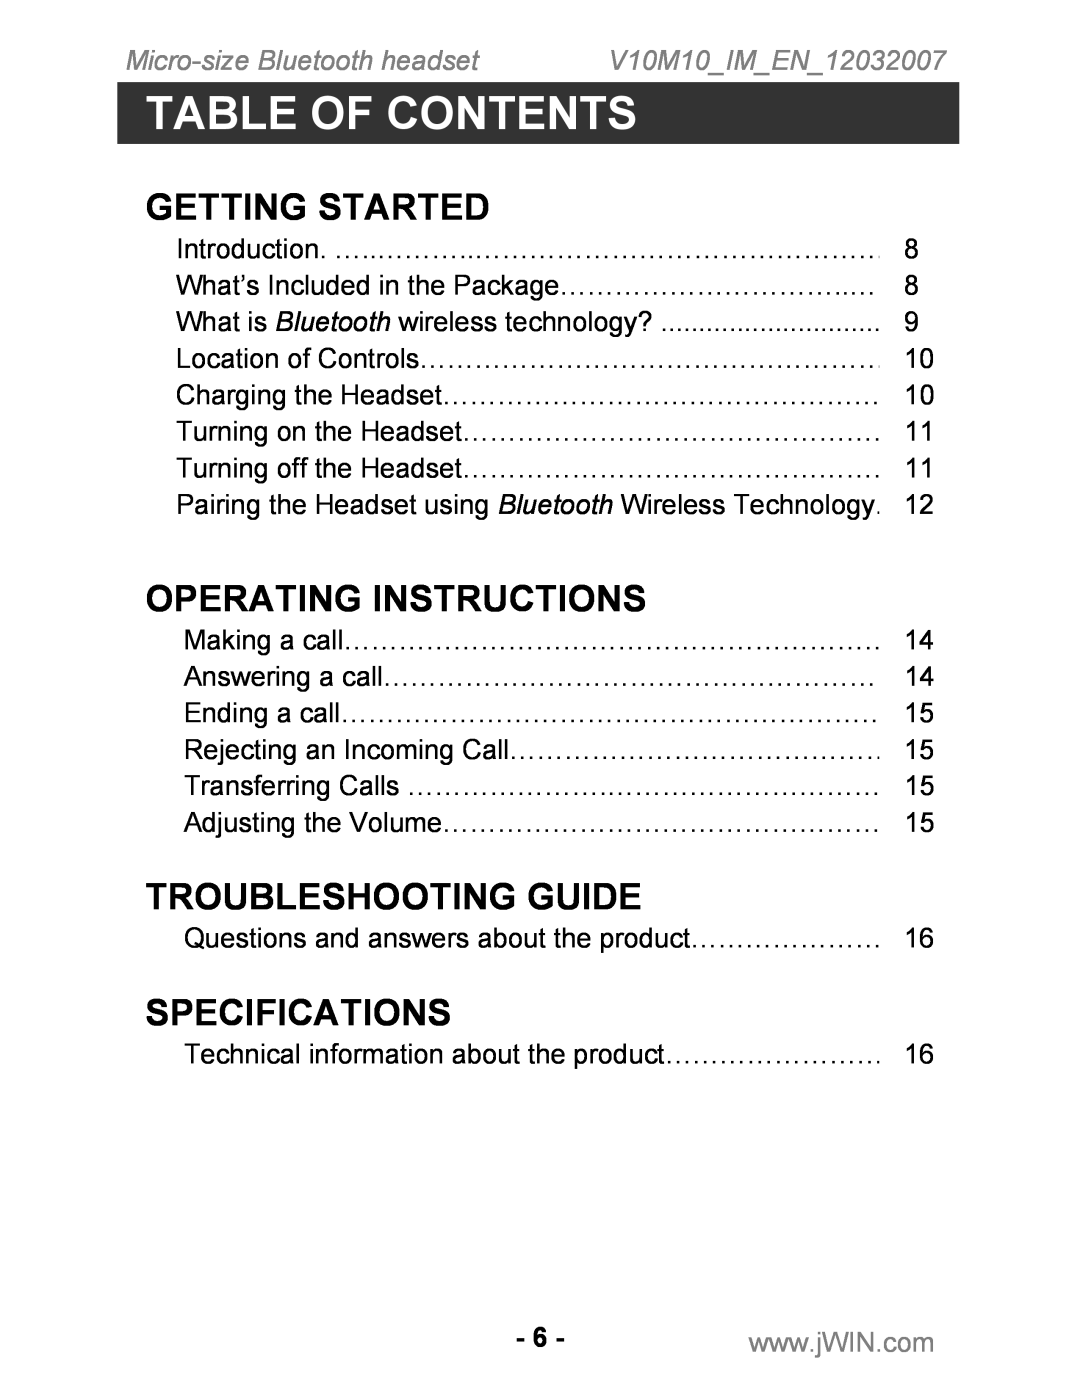 Jwin JB-TH210 Table Of Contents, Getting Started, Operating Instructions, Troubleshooting Guide, Specifications 